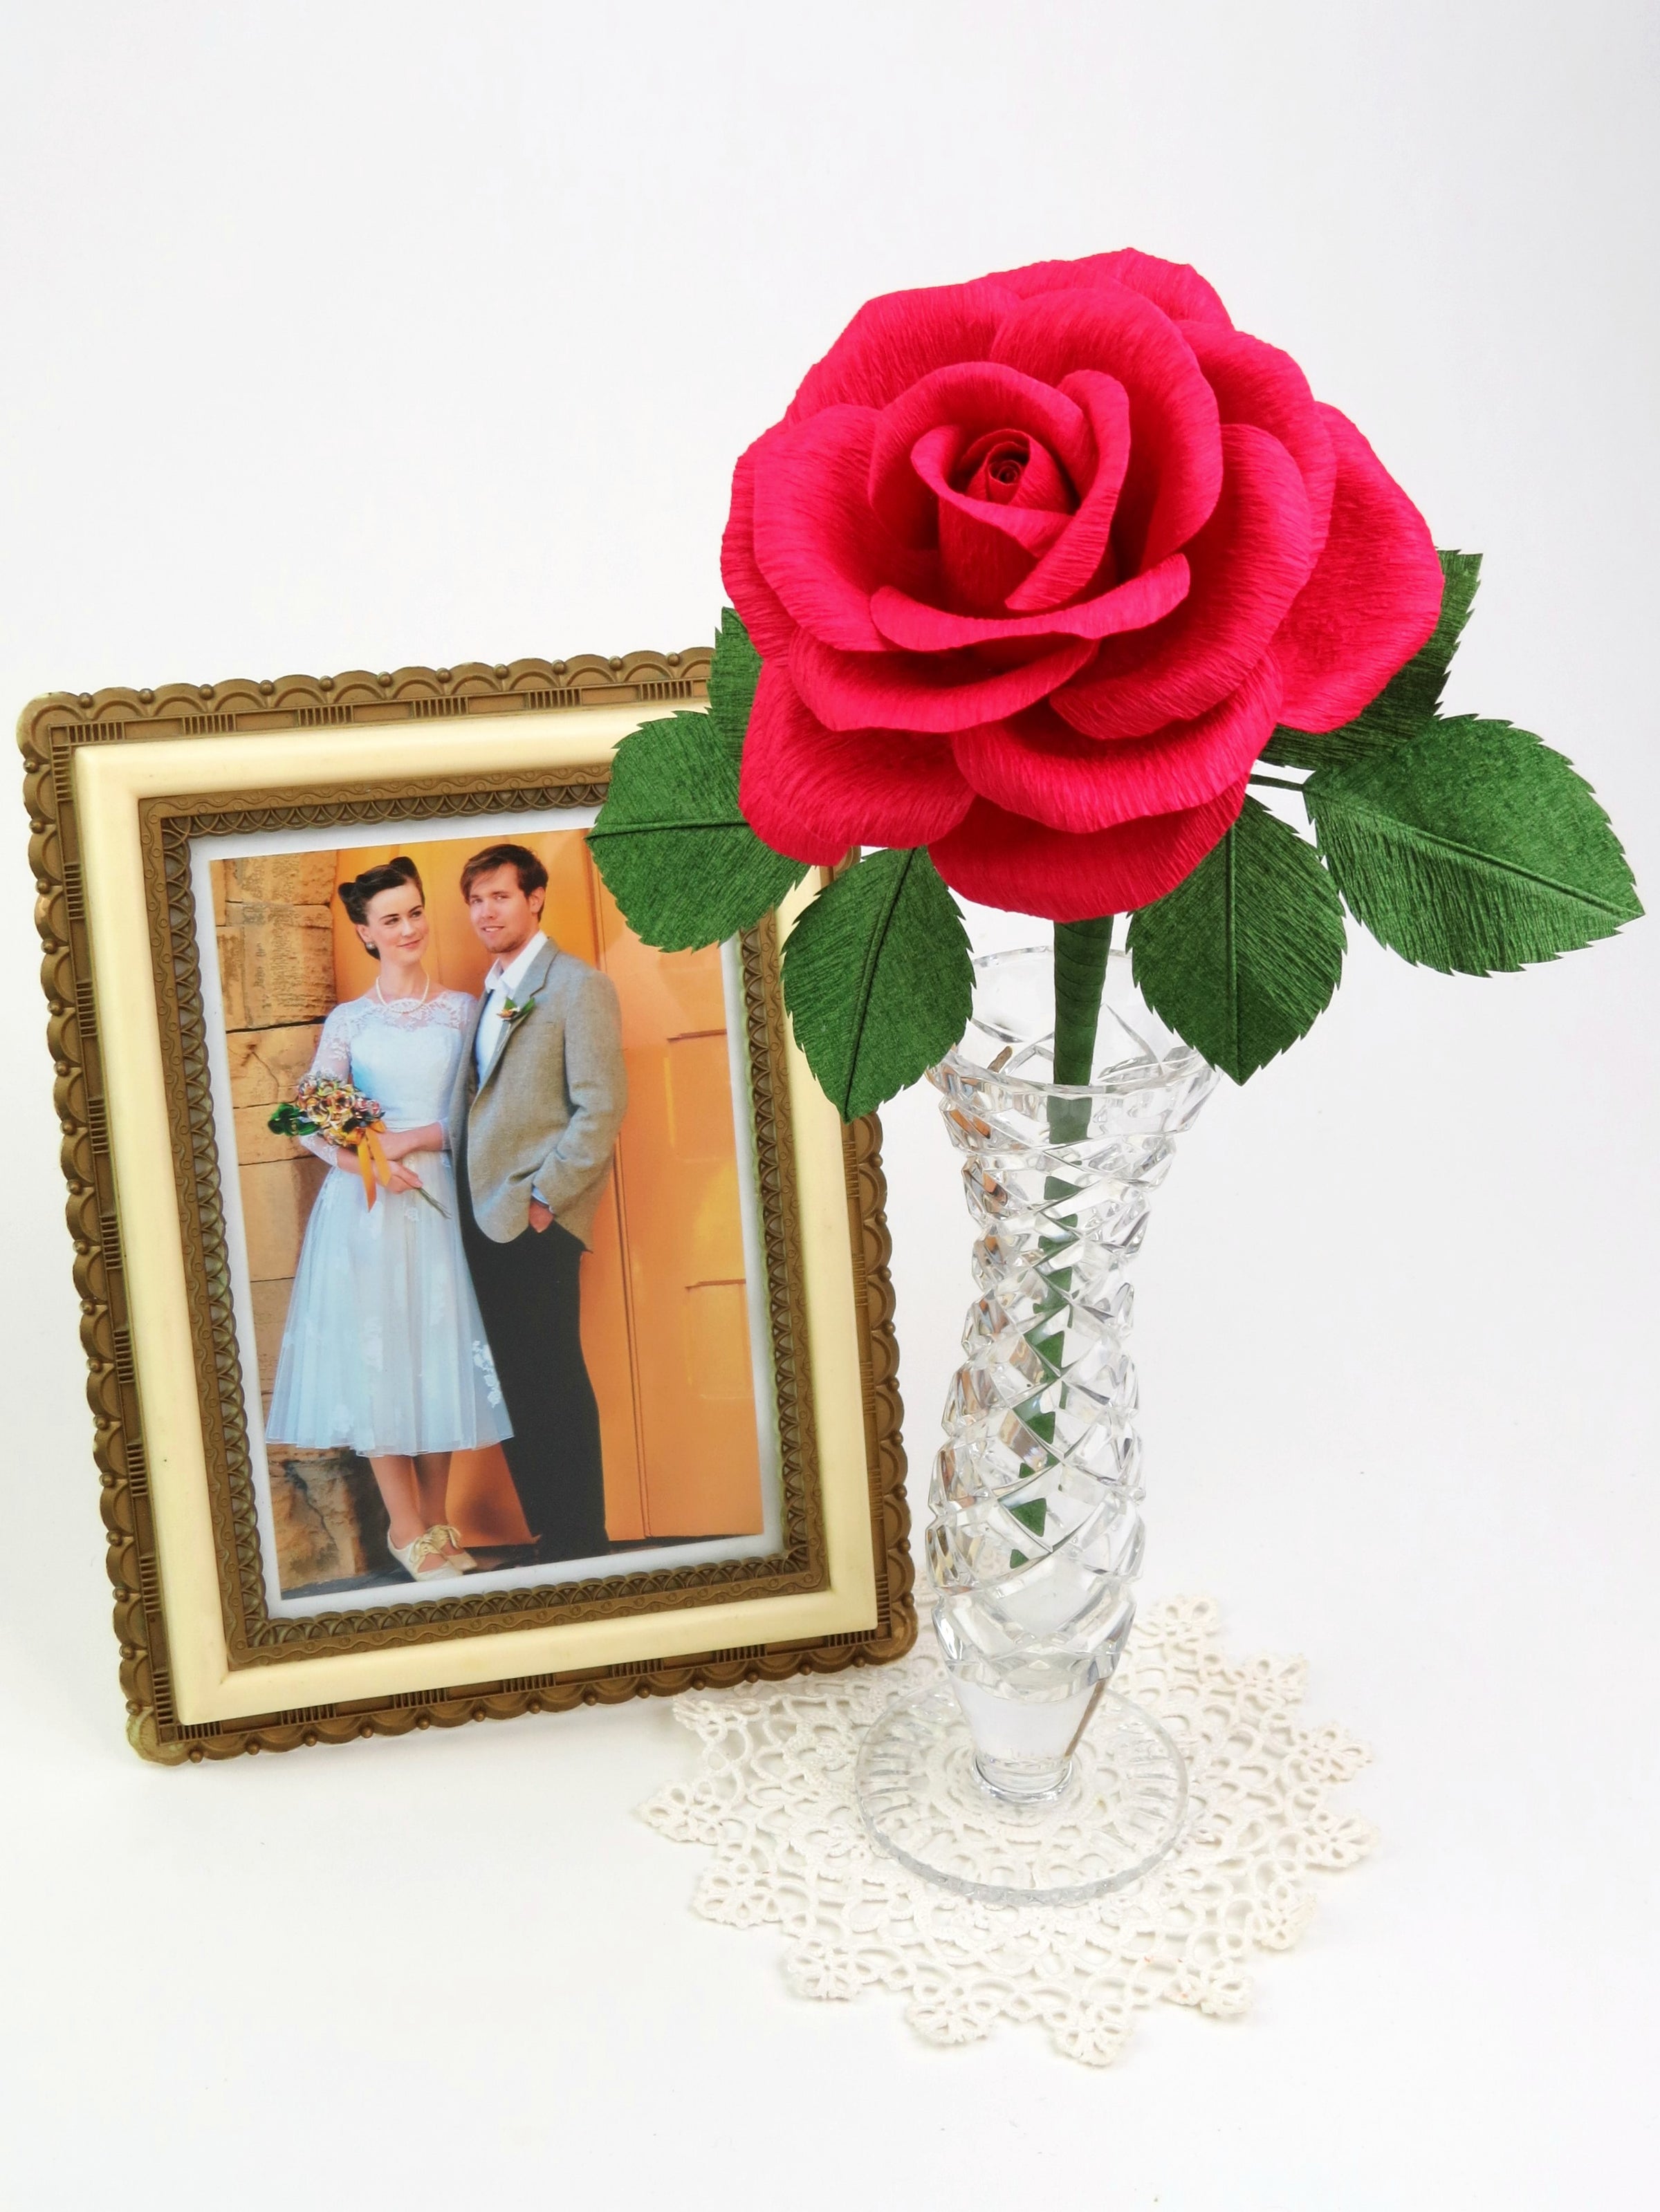 Red paper rose with six green leaves standing in a slender glass vase on top of a white vintage doily with a framed wedding photo of a happy bride and groom standing beside it